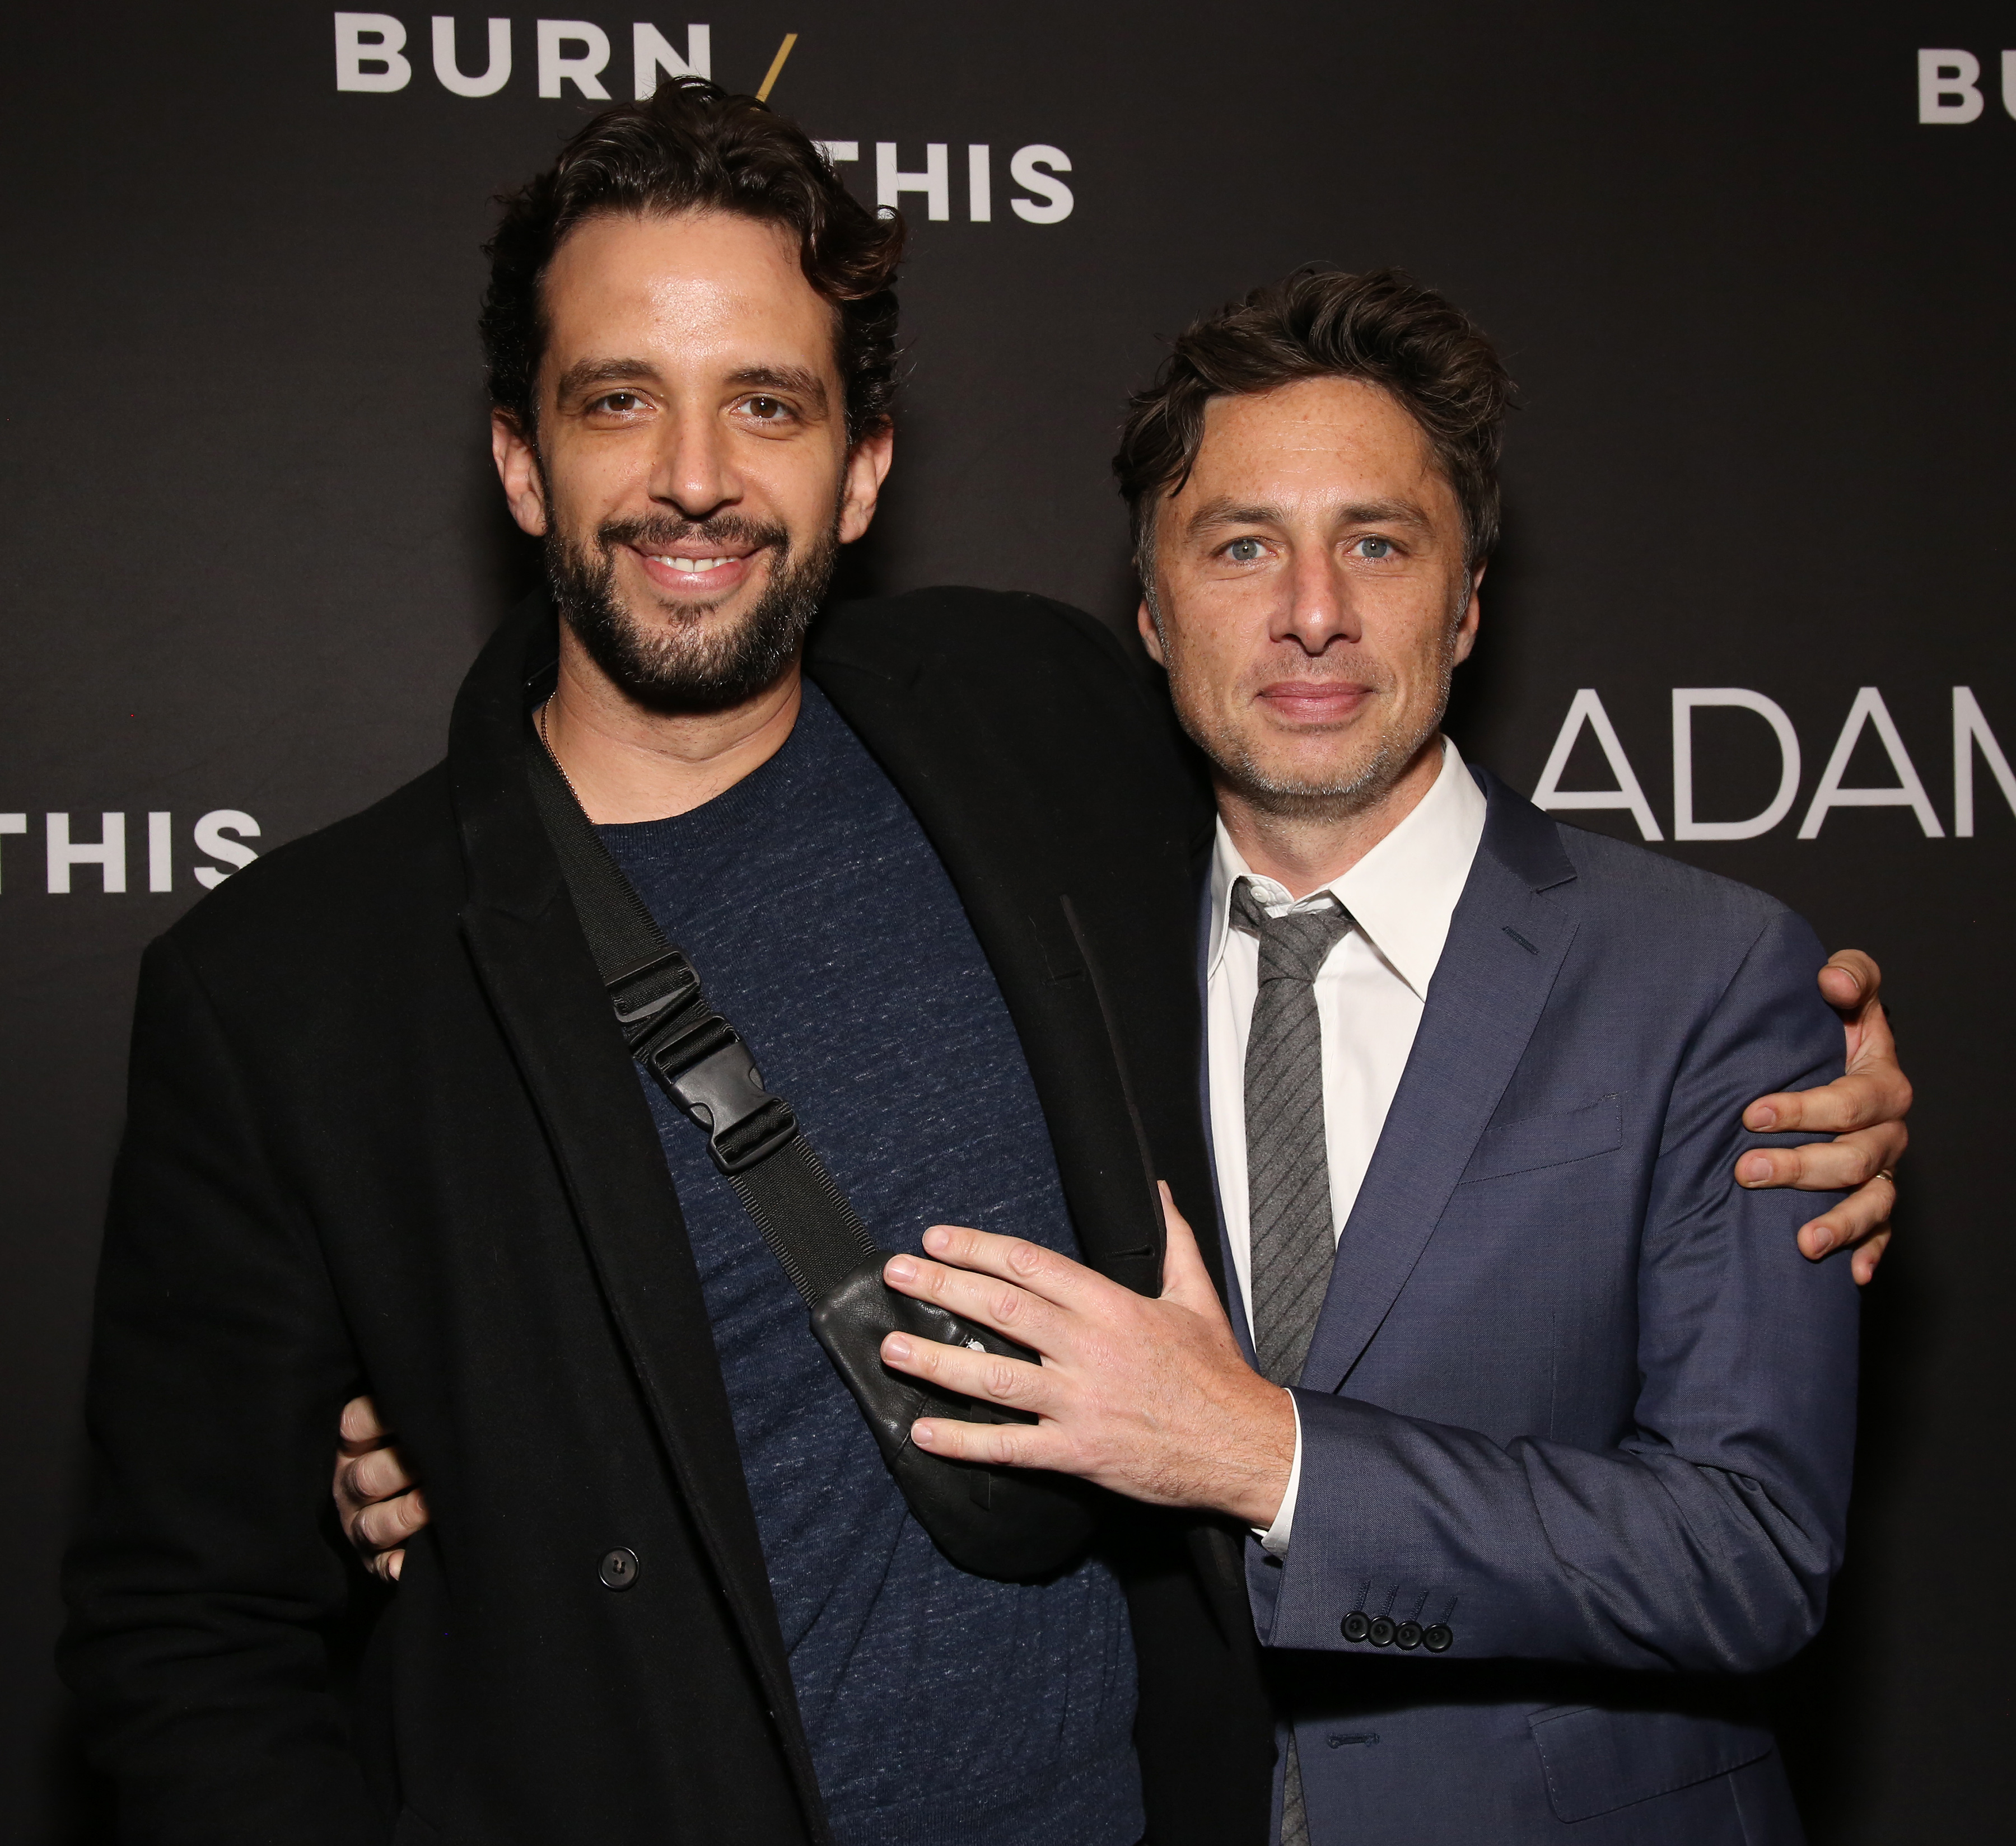 Zach Braff remembers close friend Nick Cordero's life and last days in emotional podcast